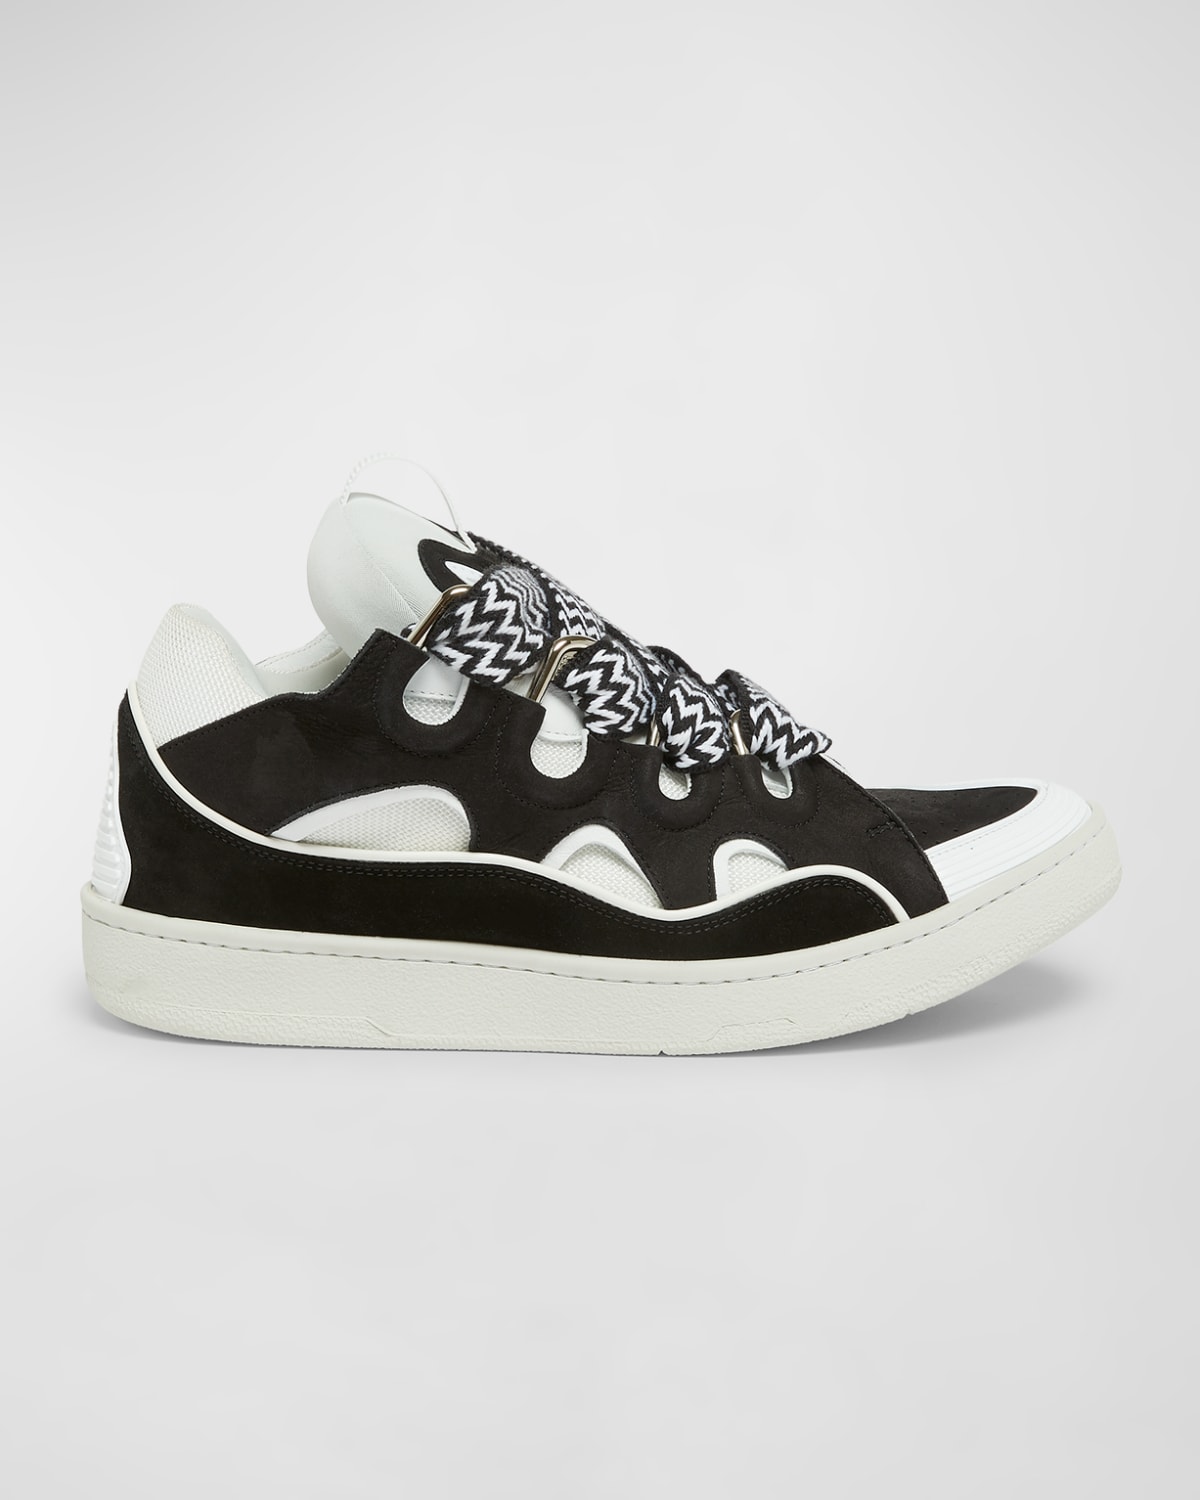 LANVIN MEN'S LEATHER LOW-TOP CURB SNEAKERS